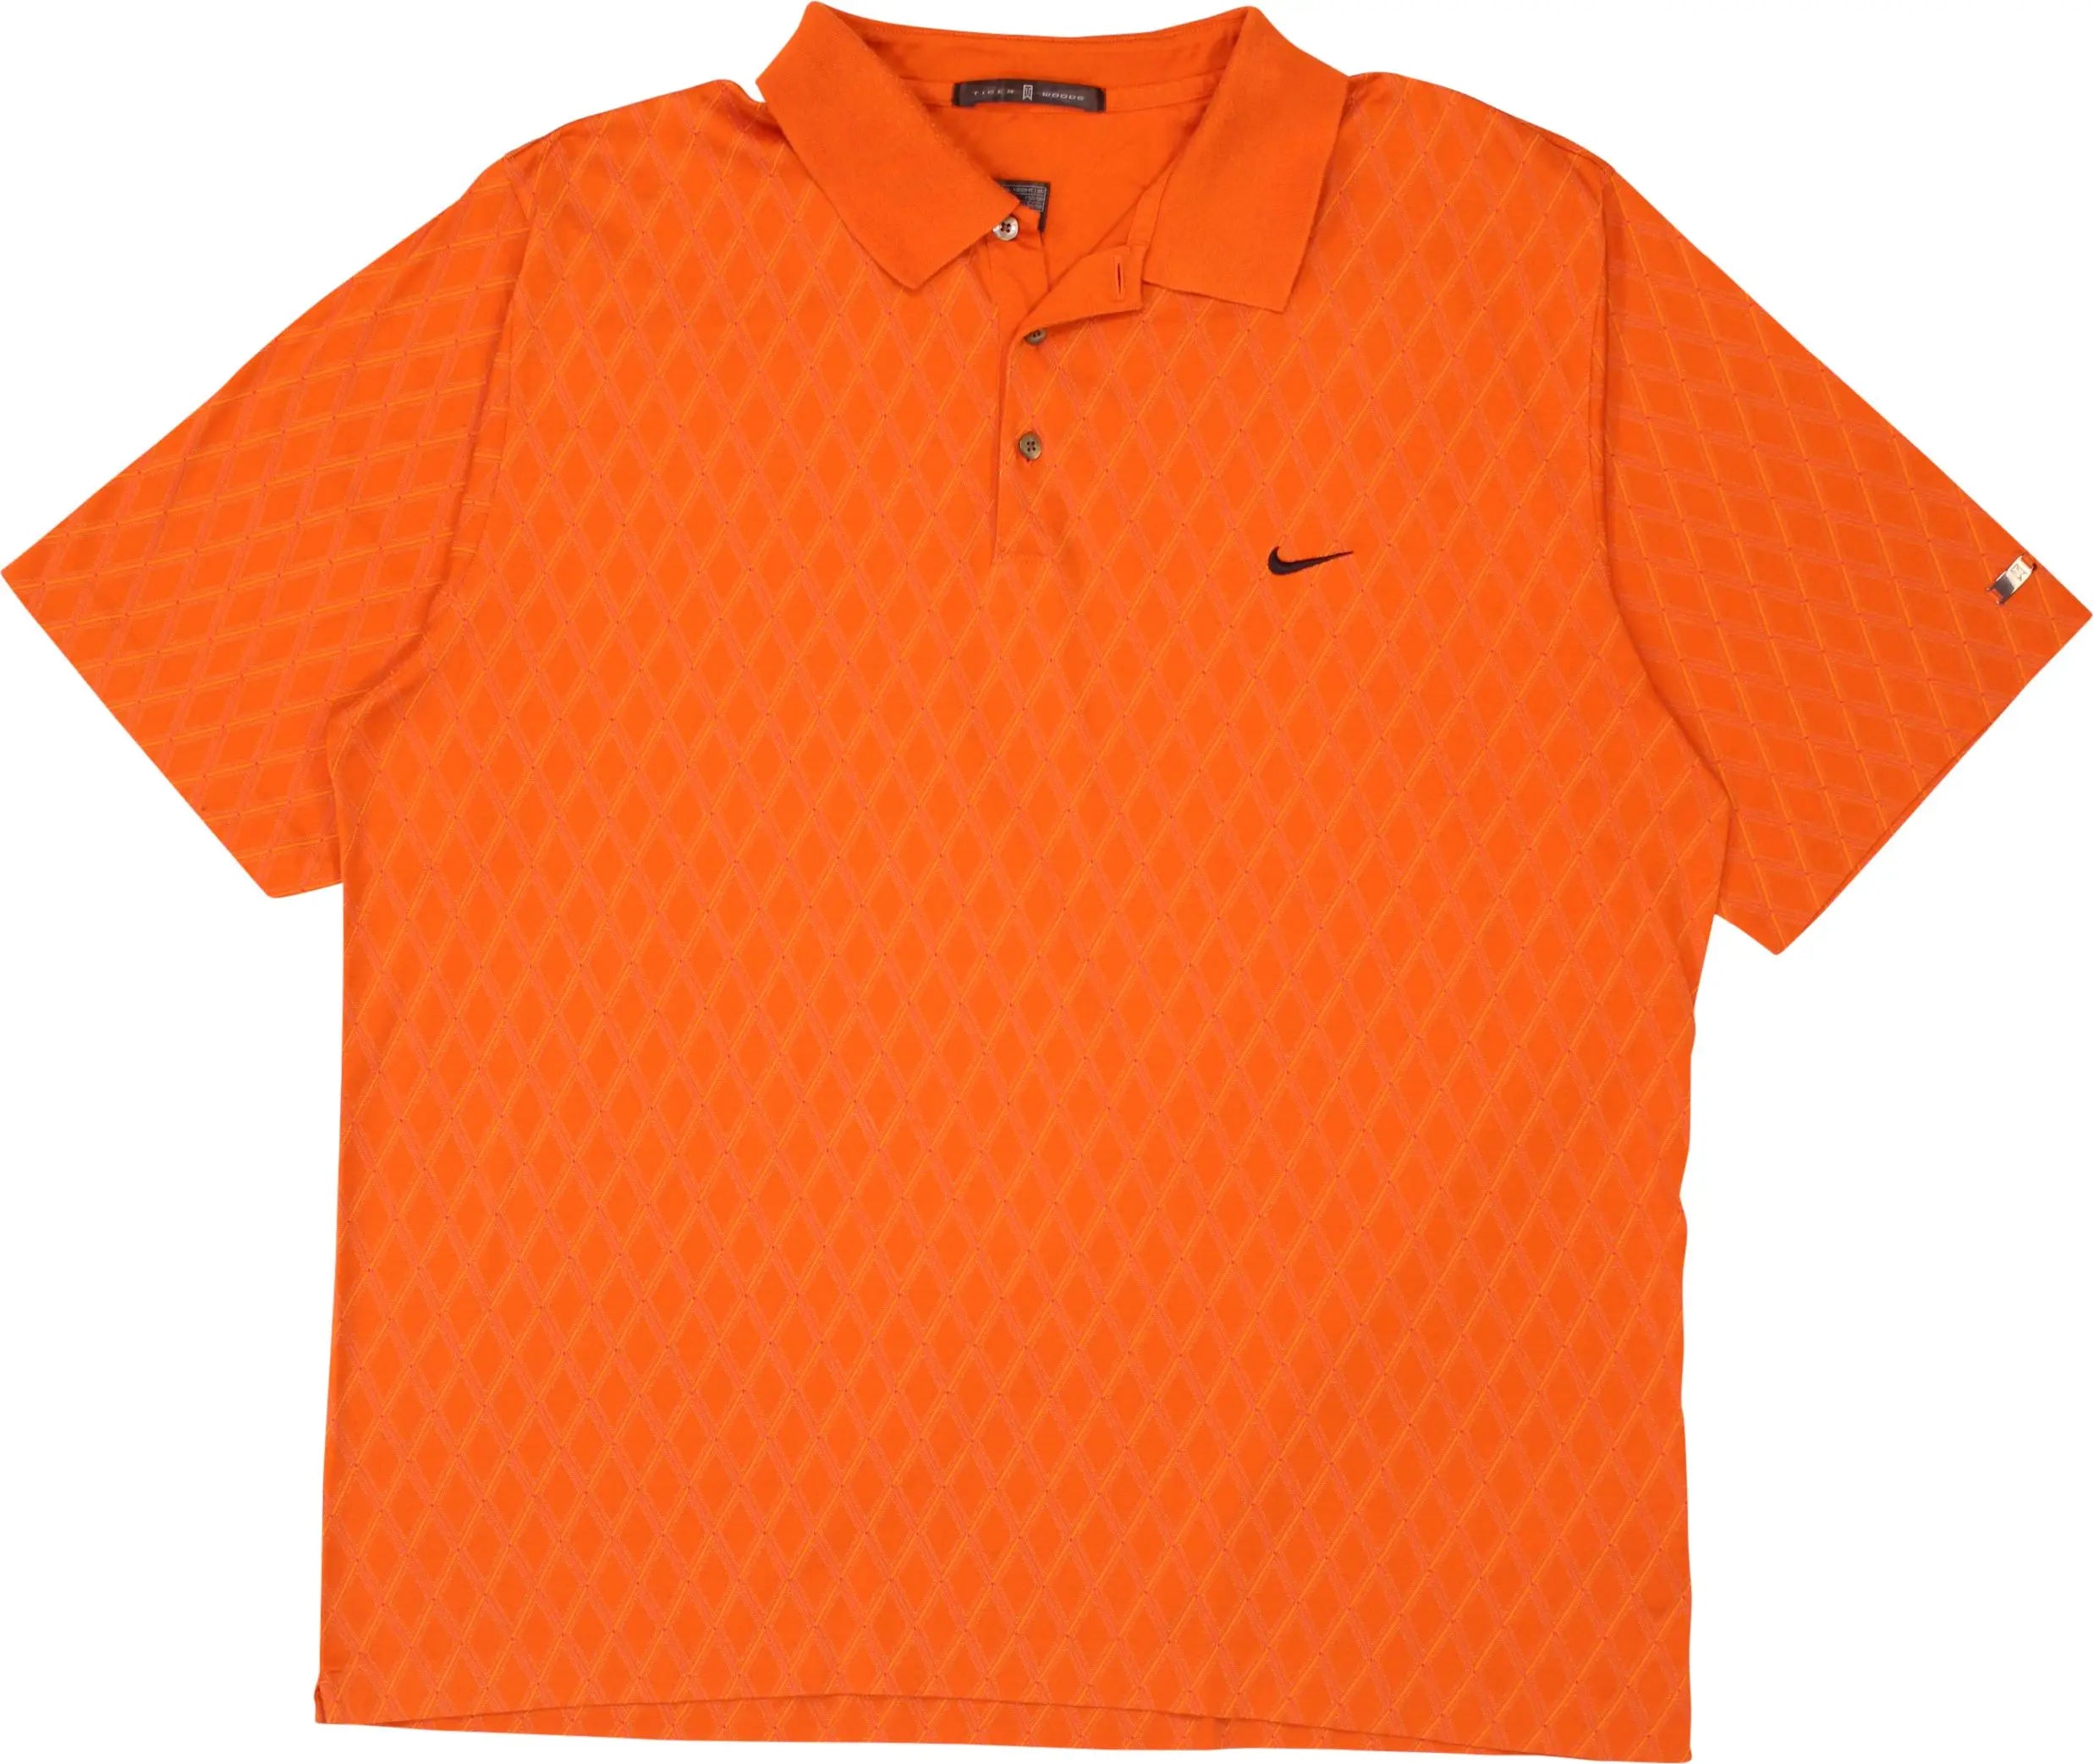 Nike - Nike Tiger Woods Orange Polo Shirt- ThriftTale.com - Vintage and second handclothing